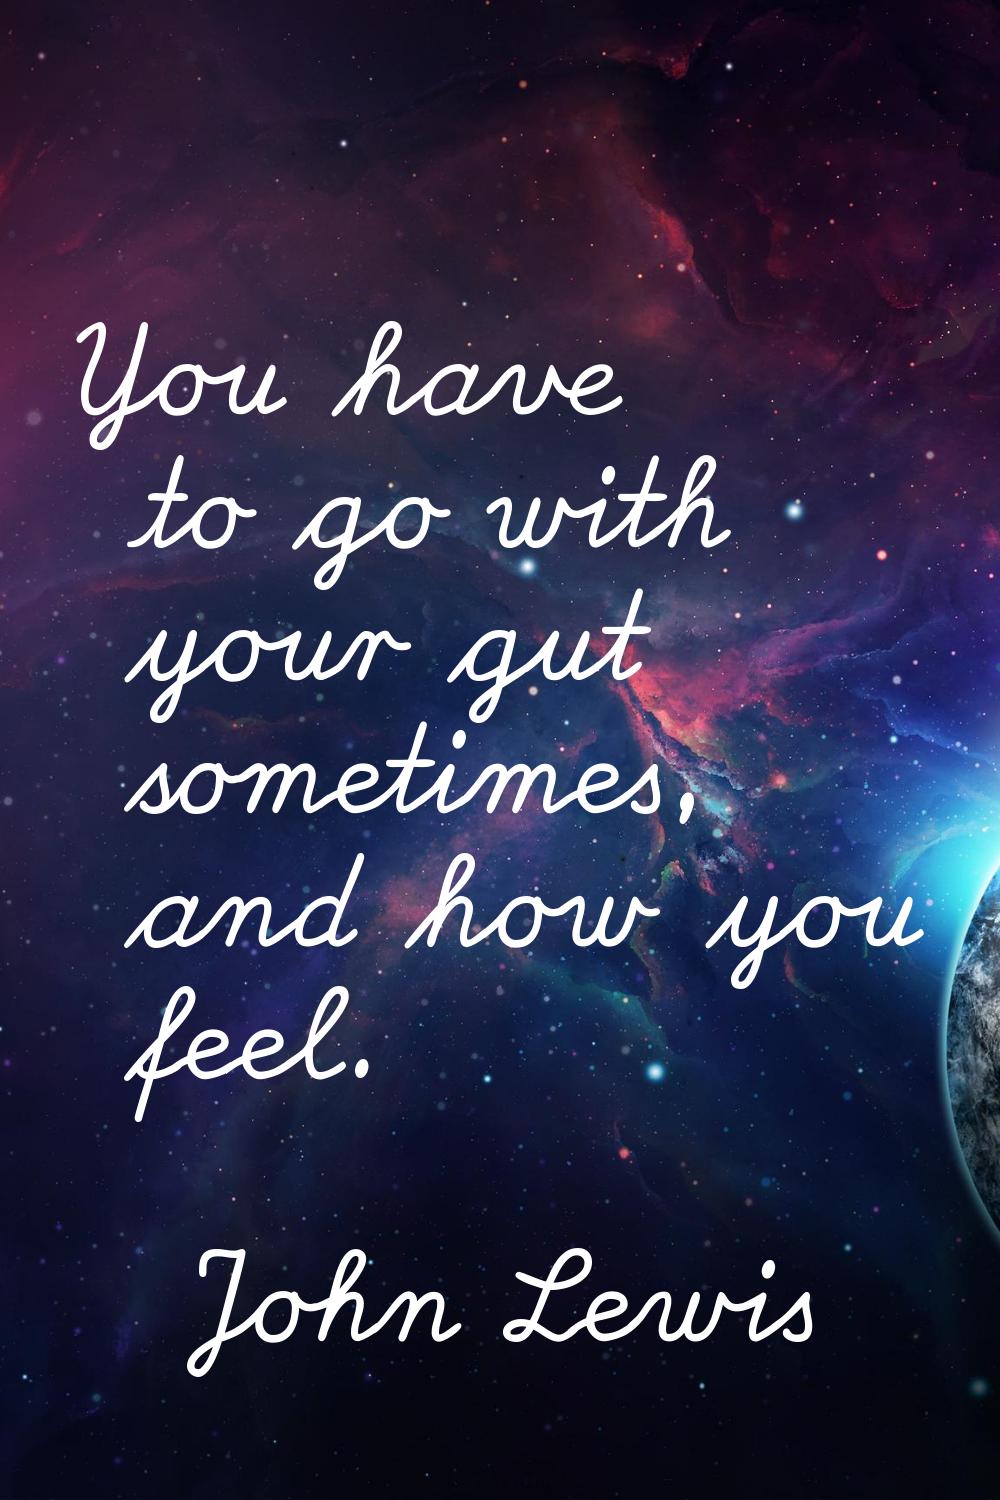 You have to go with your gut sometimes, and how you feel.